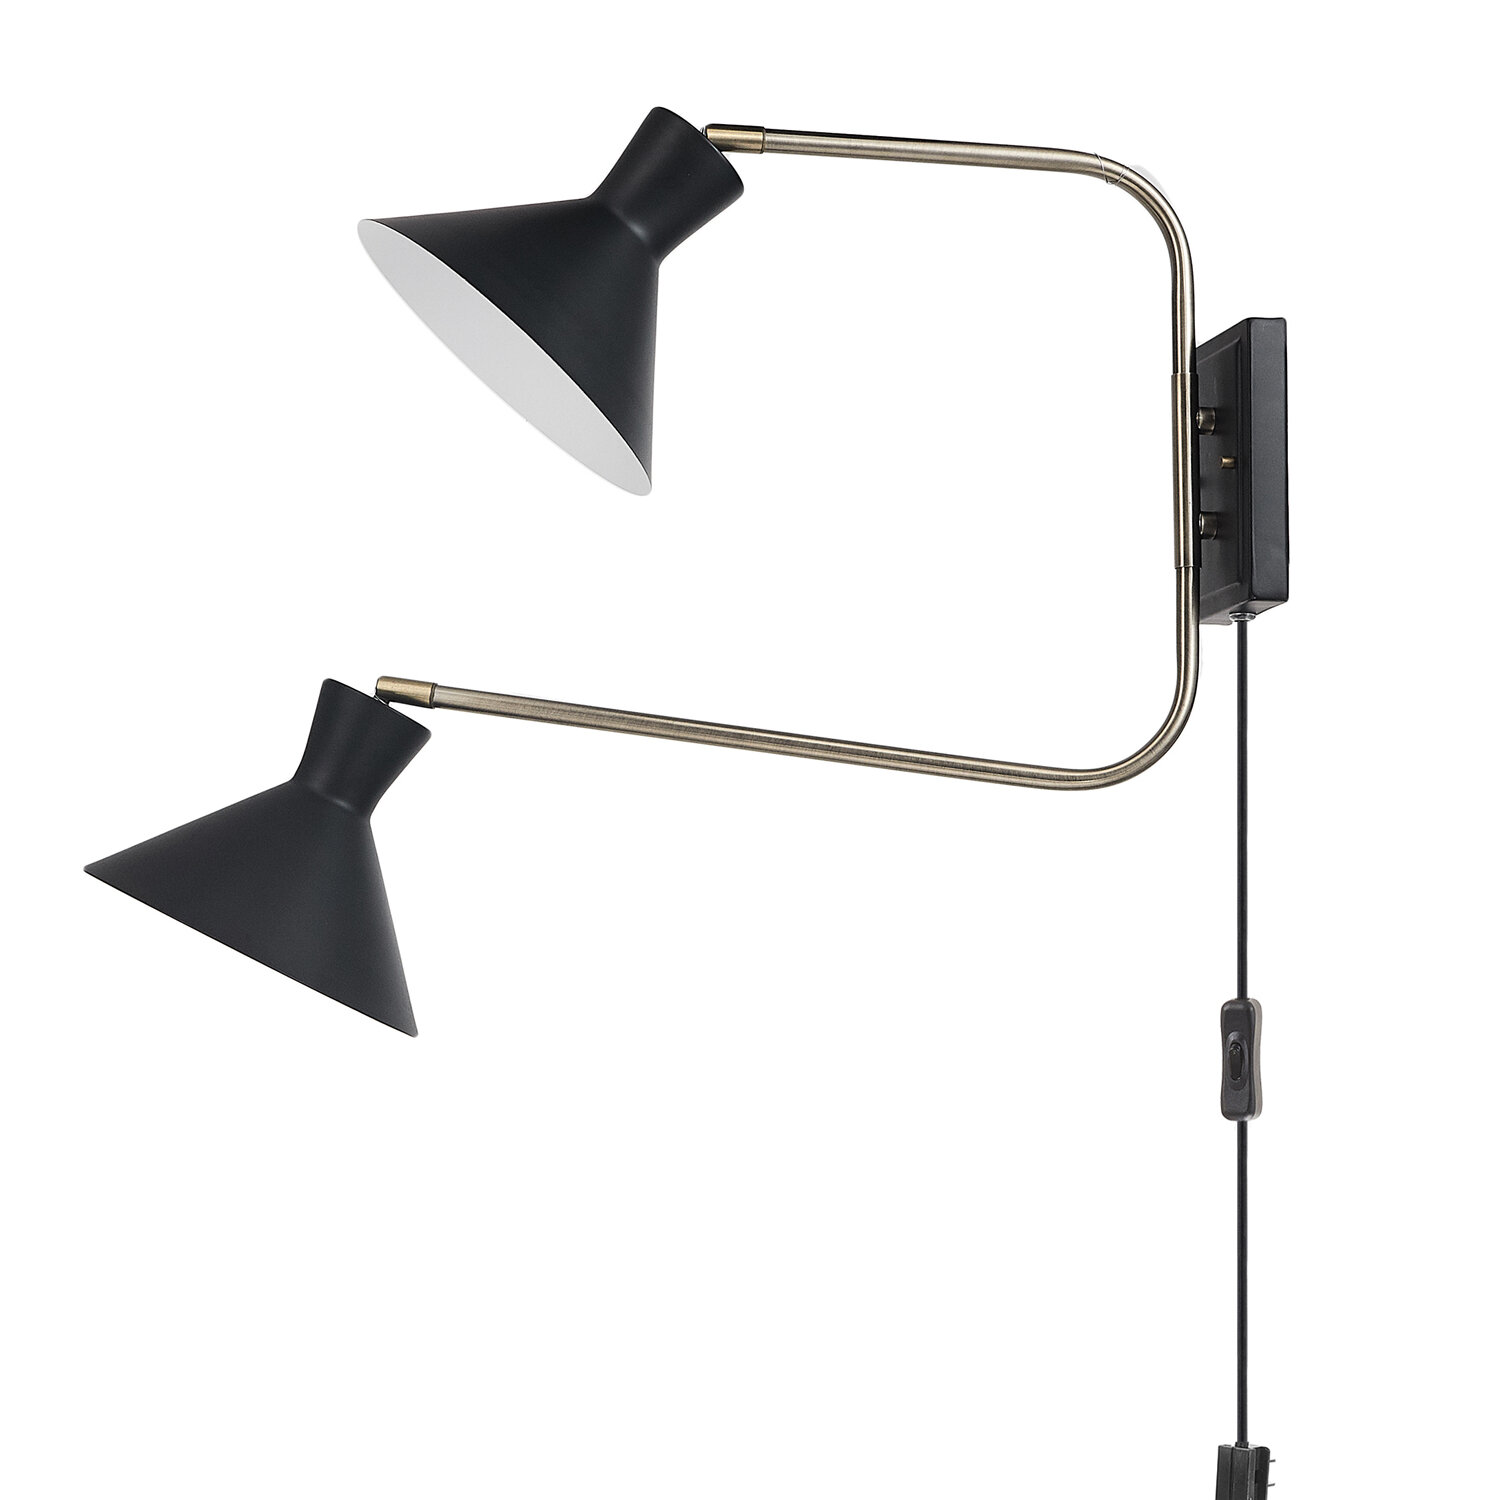 20TH C Library Double Swing Arm Wall Mount Lamp E27 Light Sconce Matte Black 